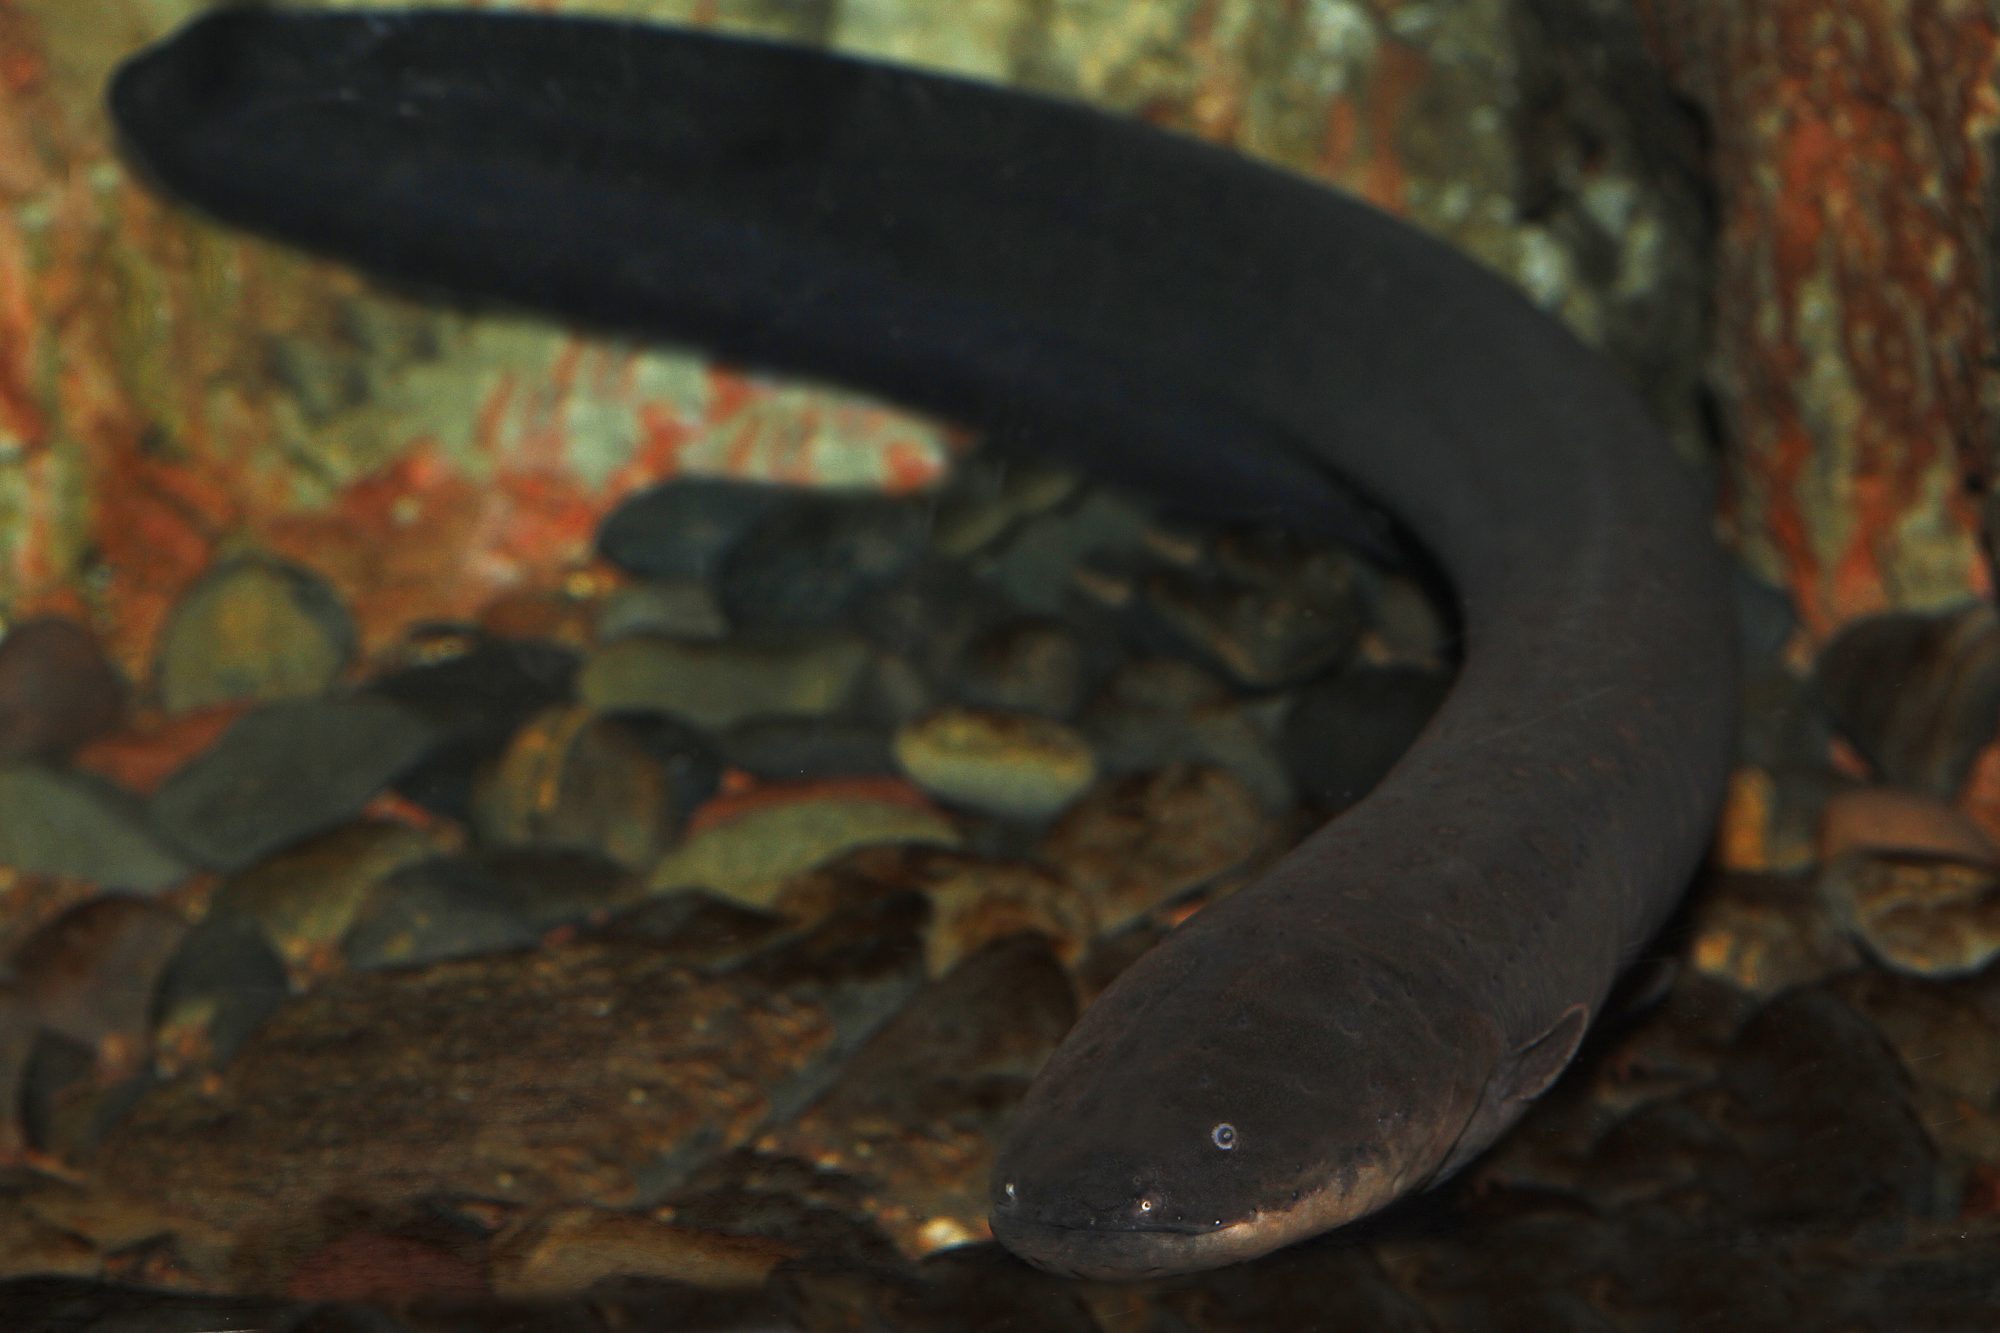 Shocking news: There are actually three species of electric eel in